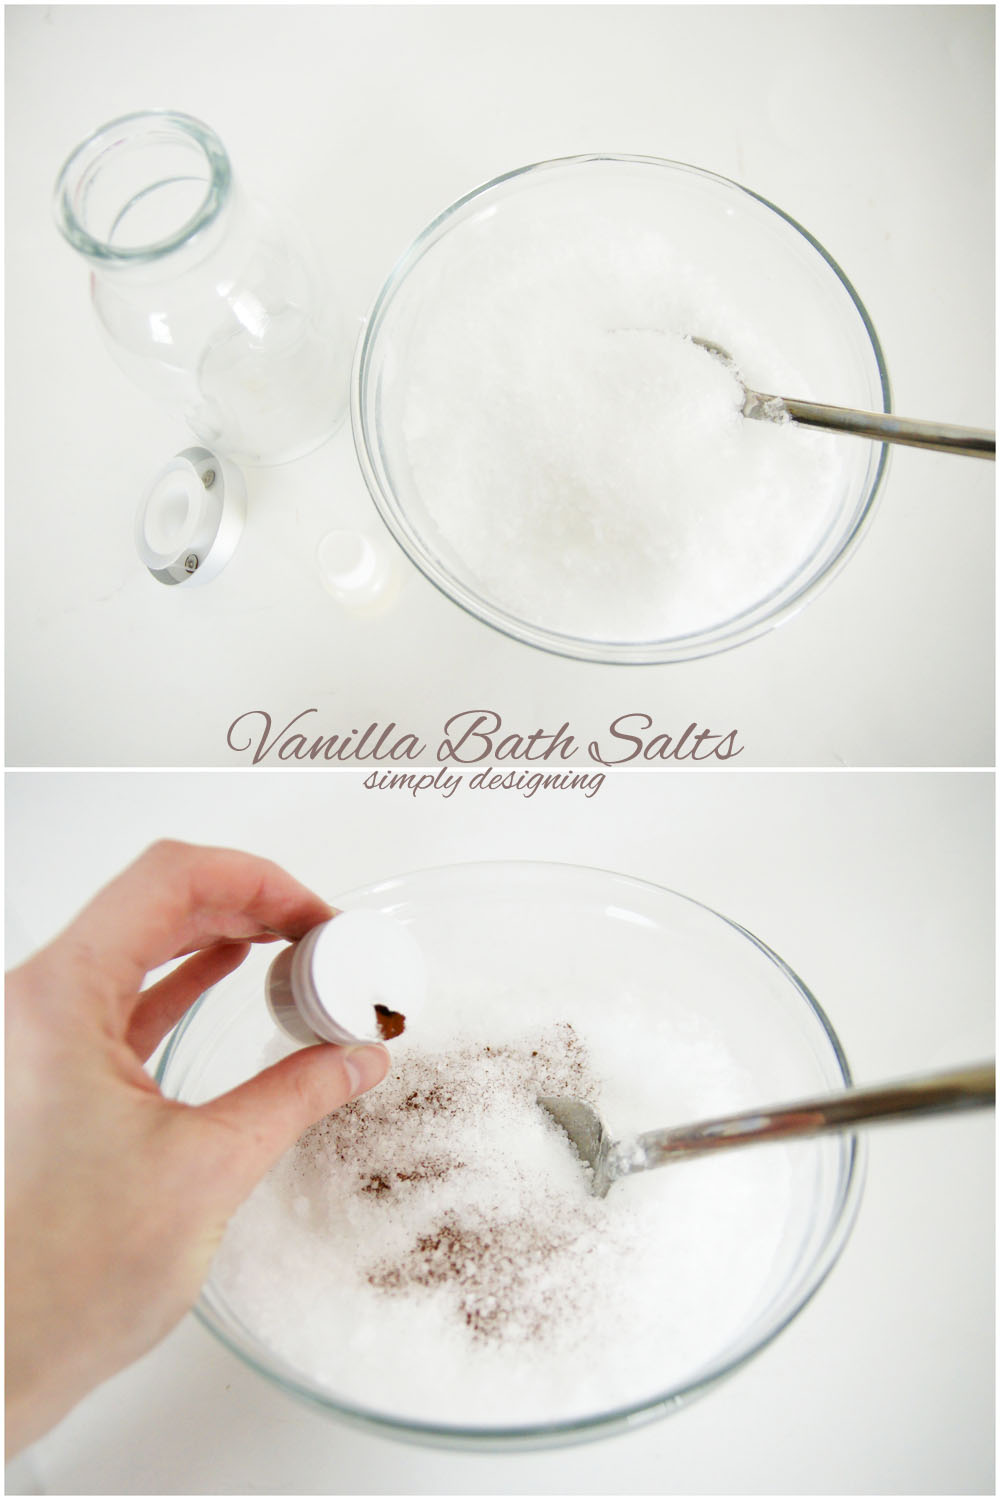 This yummy smelling vanilla bath salt recipe is so simple to make and make a bath extra luxurious with just a few ingredients and a couple of minutes.